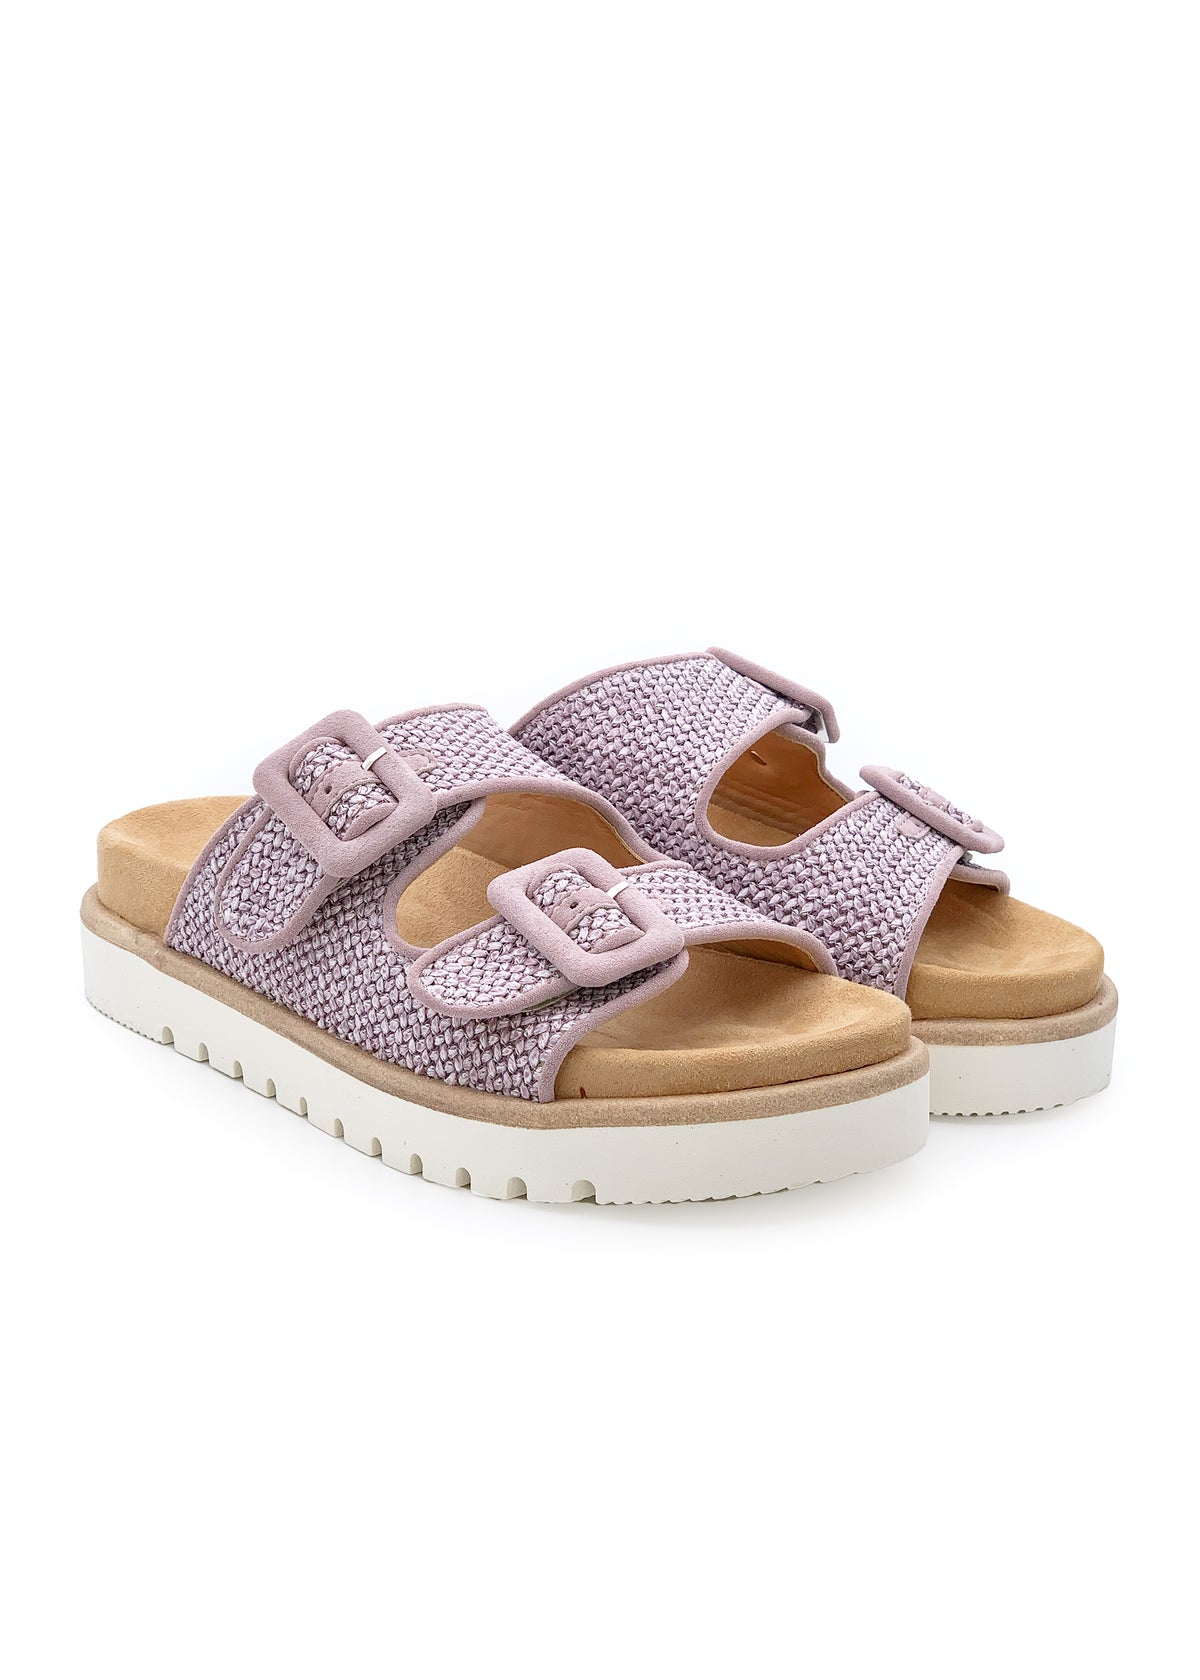 Stiletto sandals with a thicker sole - light purple knitted surface